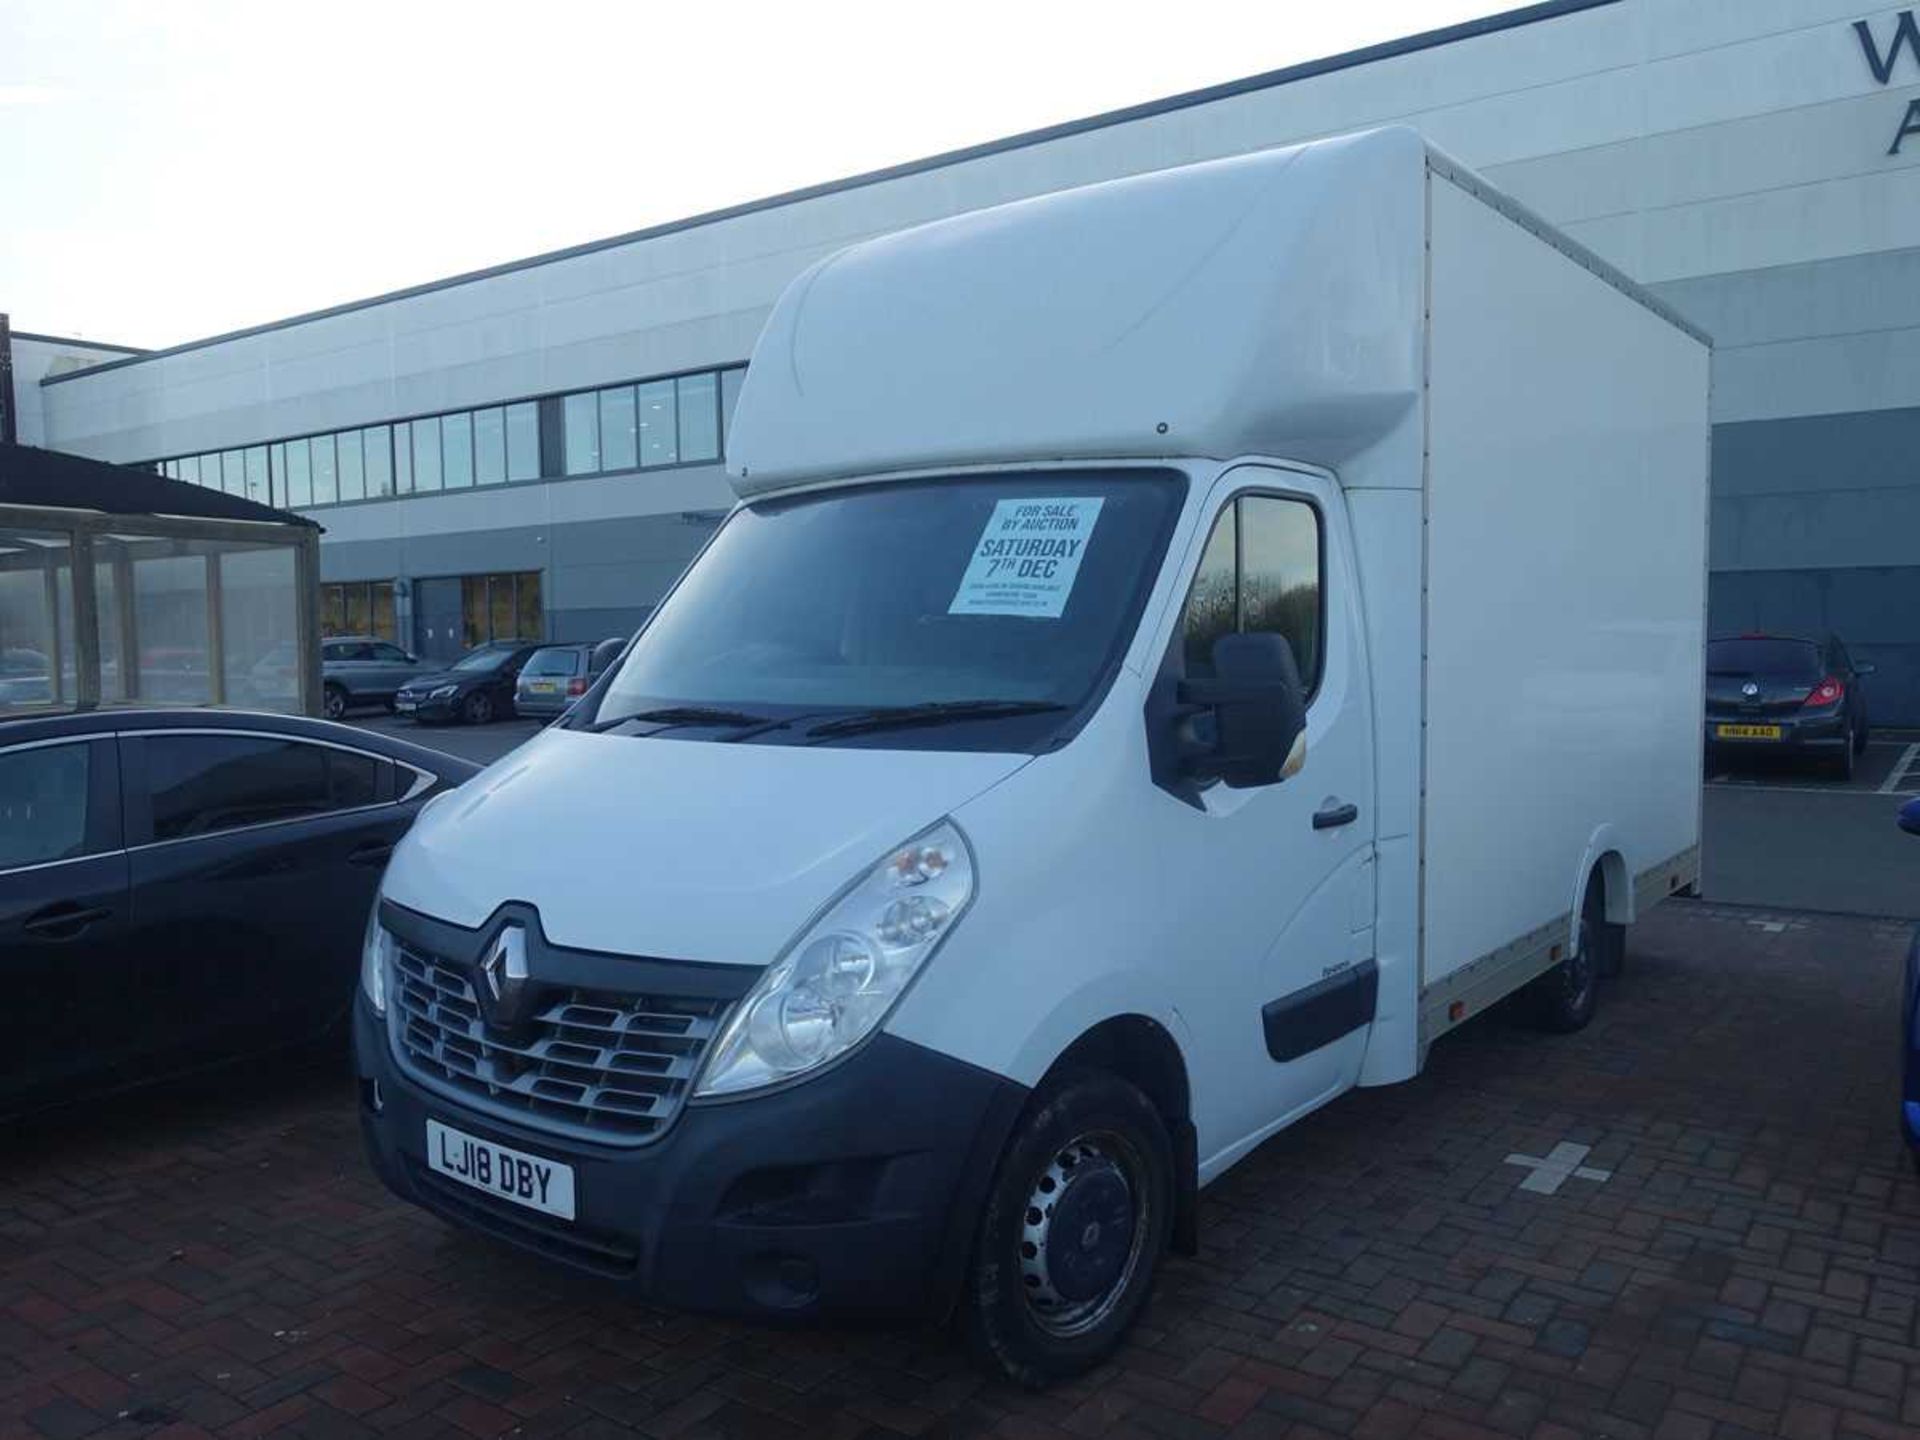 (LJ18 DBY) Renault Master ML35 B-NESS Energy DCi Luton Van in white, 6 speed manual, first